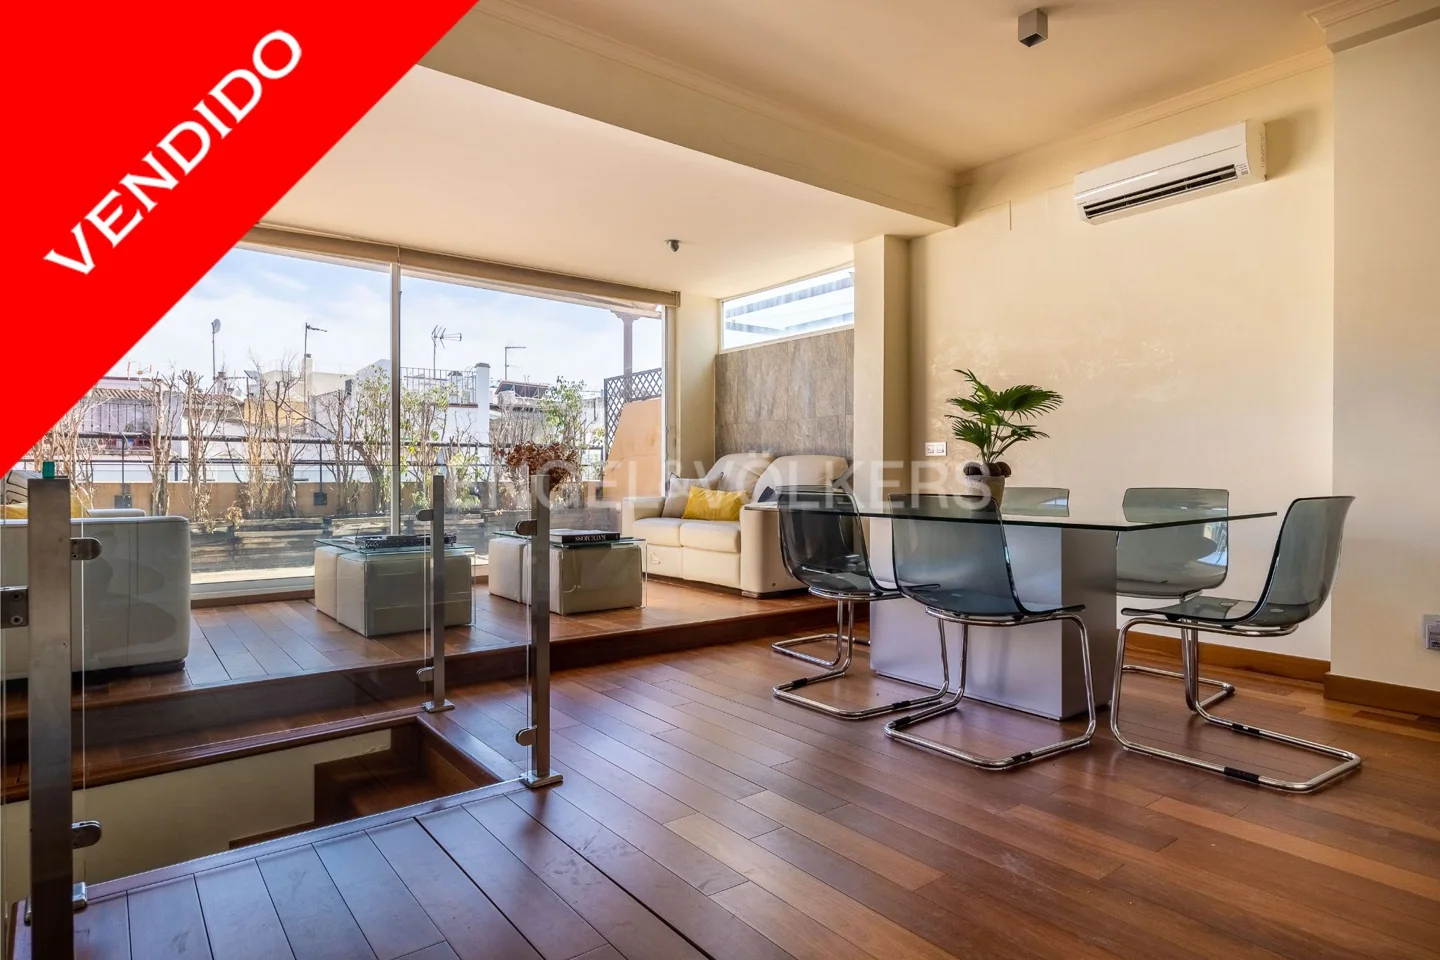 Exclusive top-floor duplex apartment with terrace and views of the Cathedral of Seville.